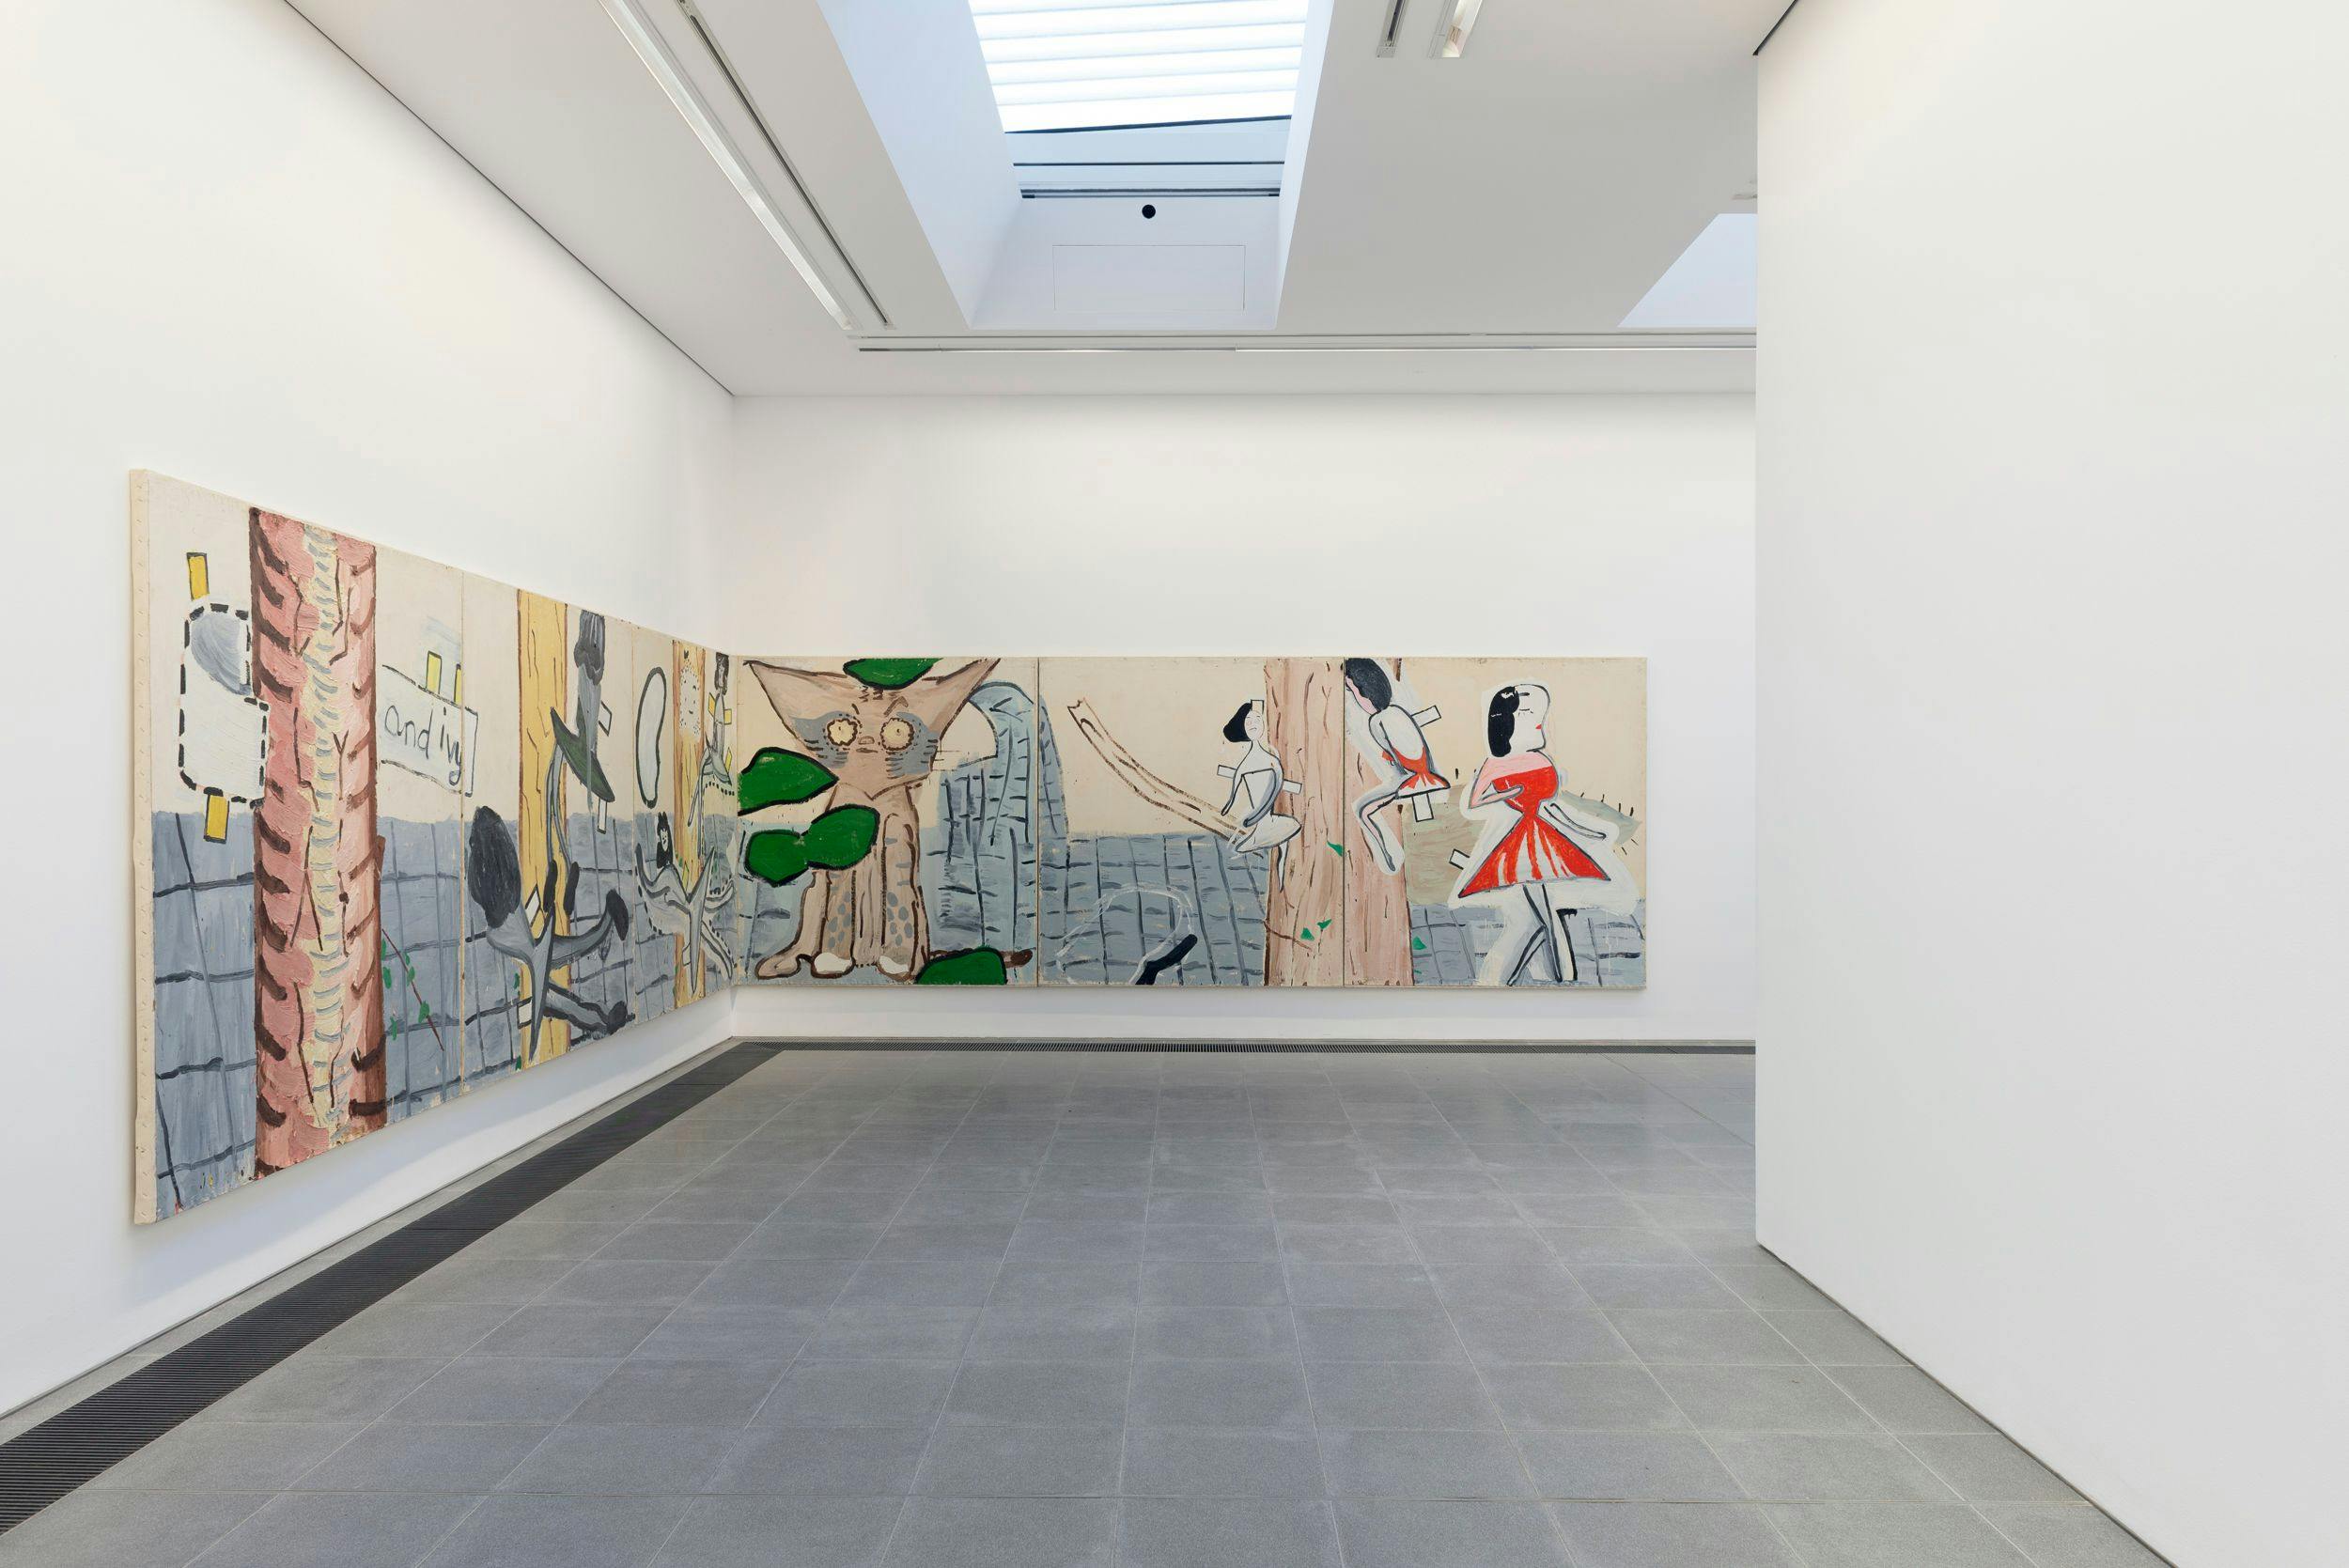 Installation view of the exhibition, Rose Wylie: Quack Quack, at Serpentine North Gallery in London, dated 2017 to 2018.